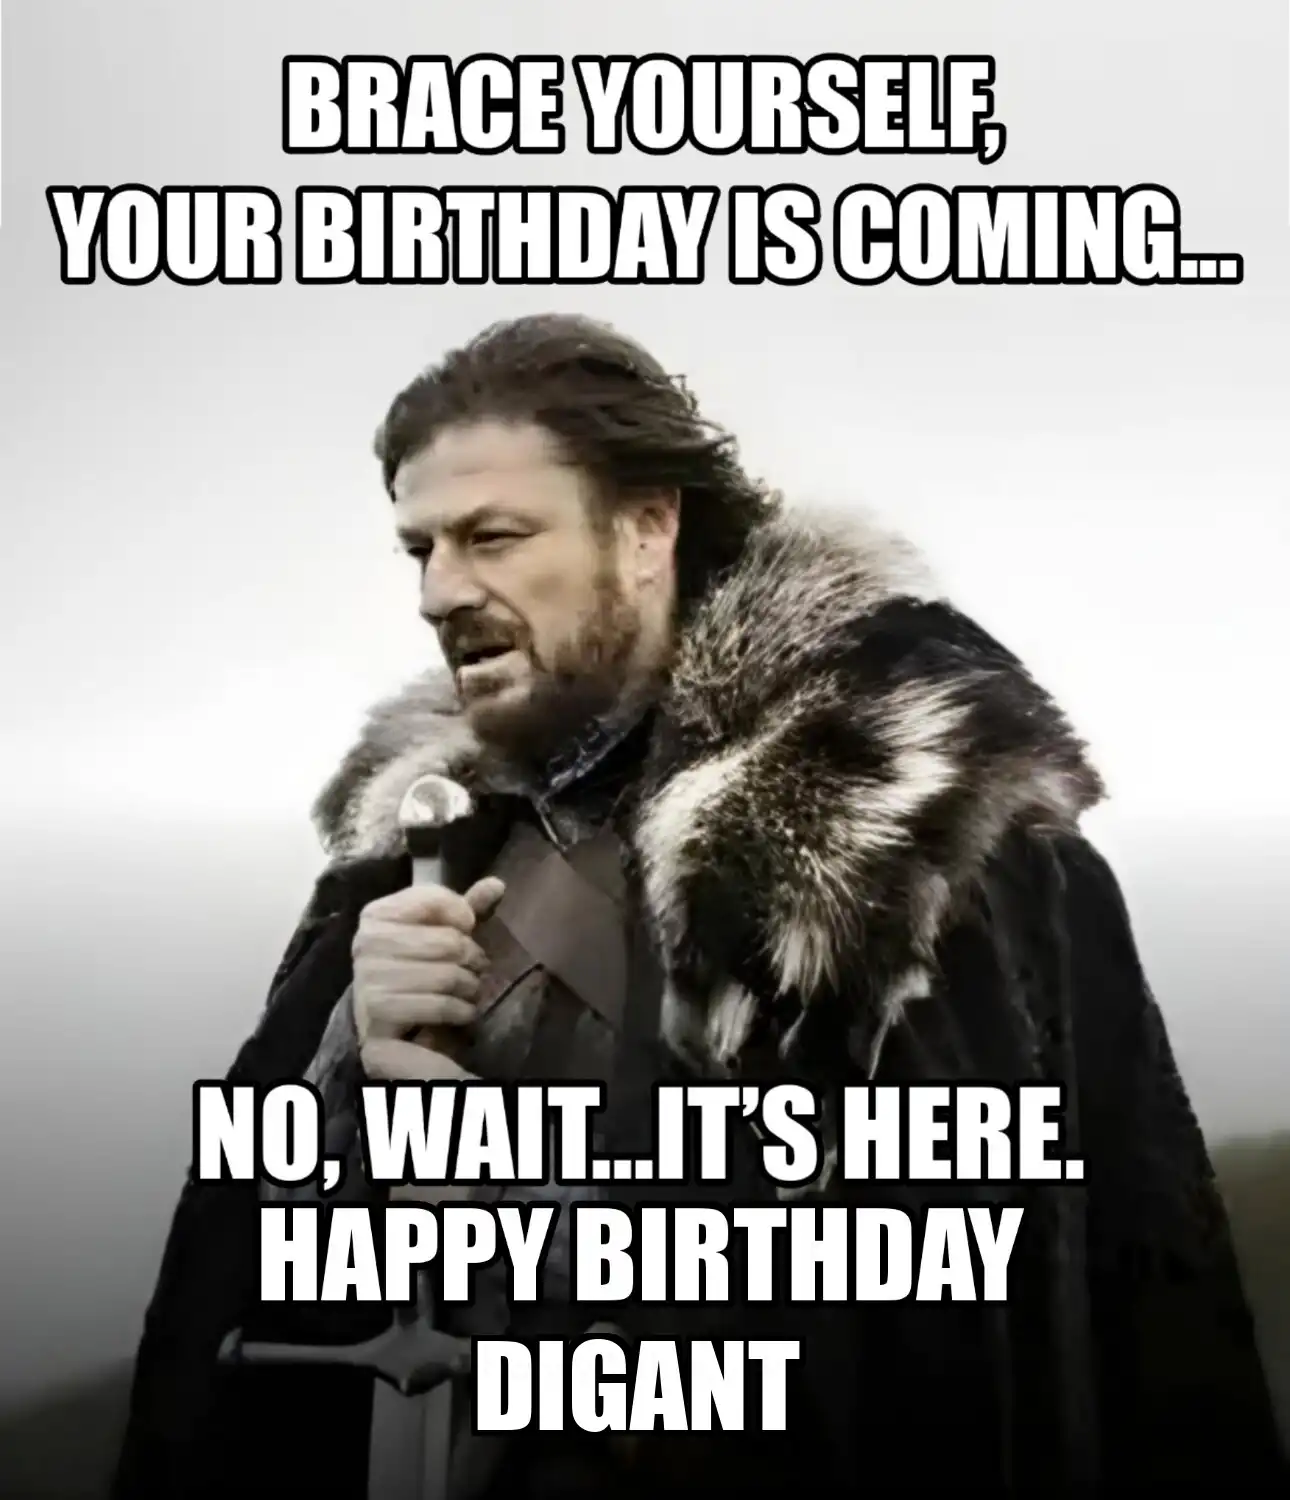 Happy Birthday Digant Brace Yourself Your Birthday Is Coming Meme